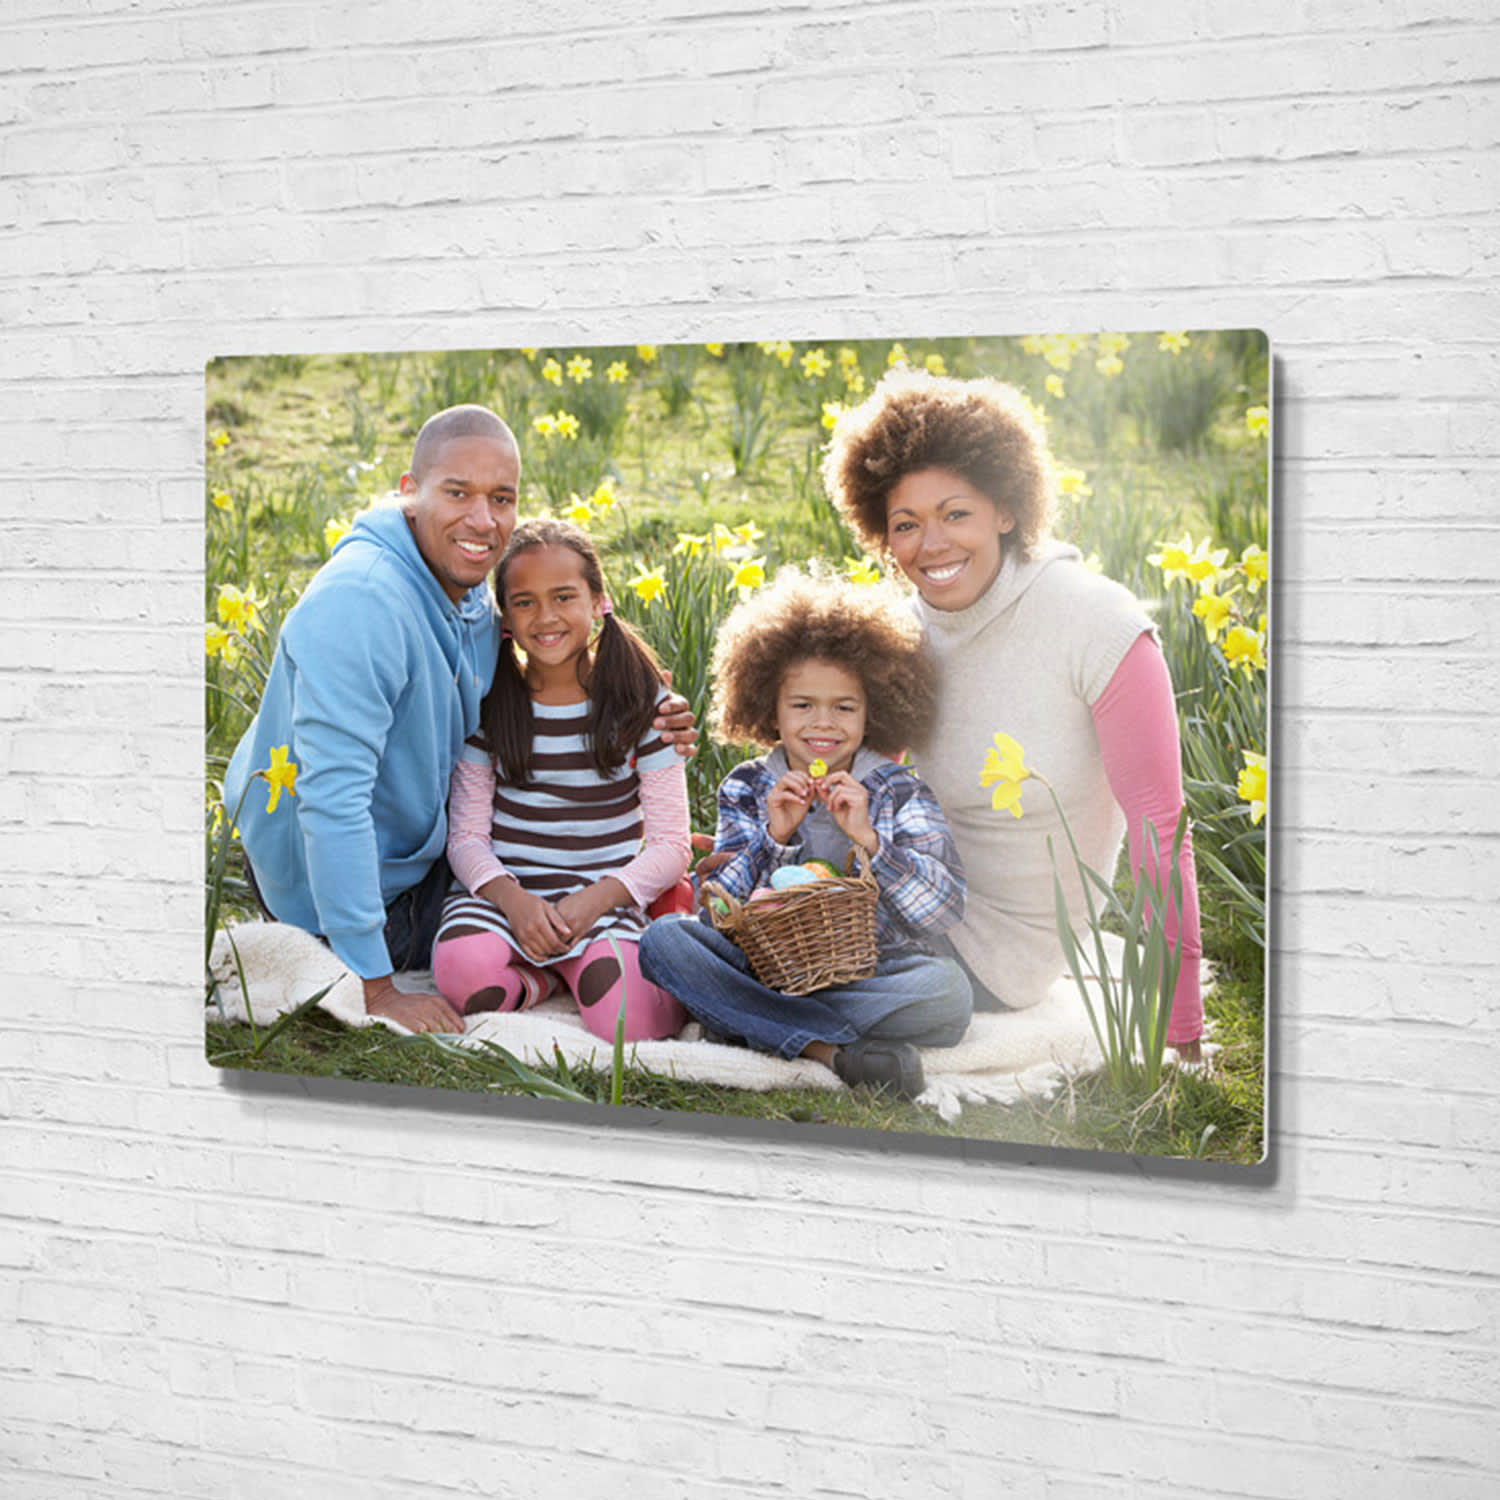 Photo Printing & Photo Gifts | Office Depot